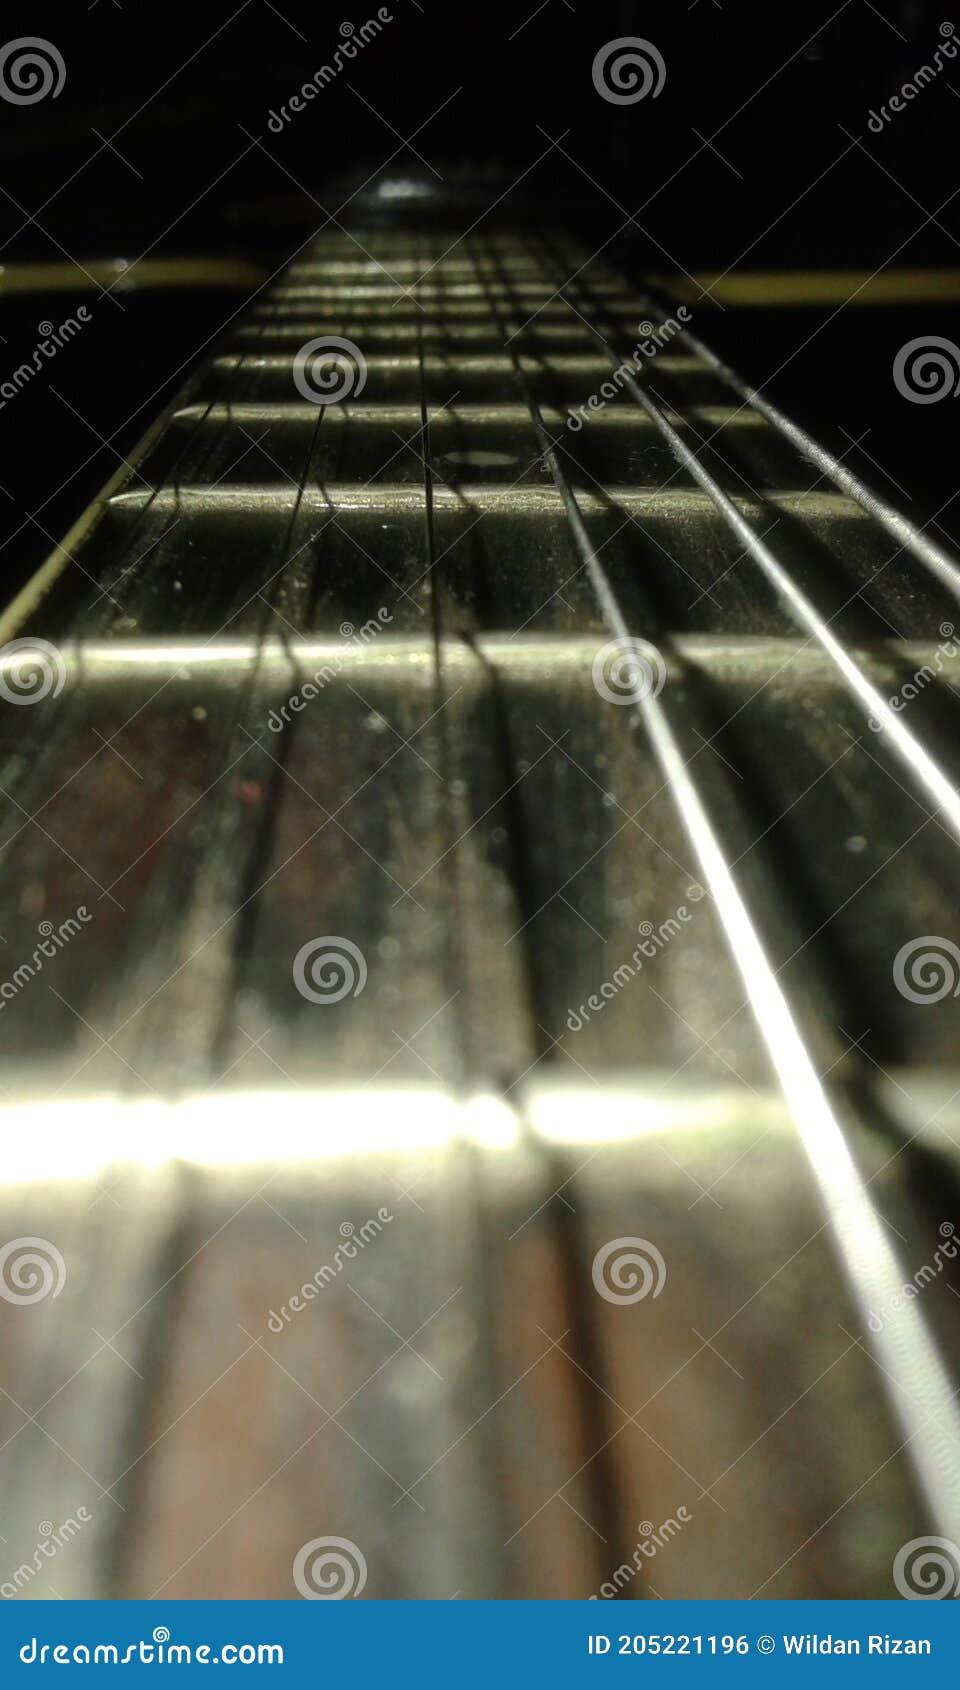 the yamaha guitar with the light on the darkness